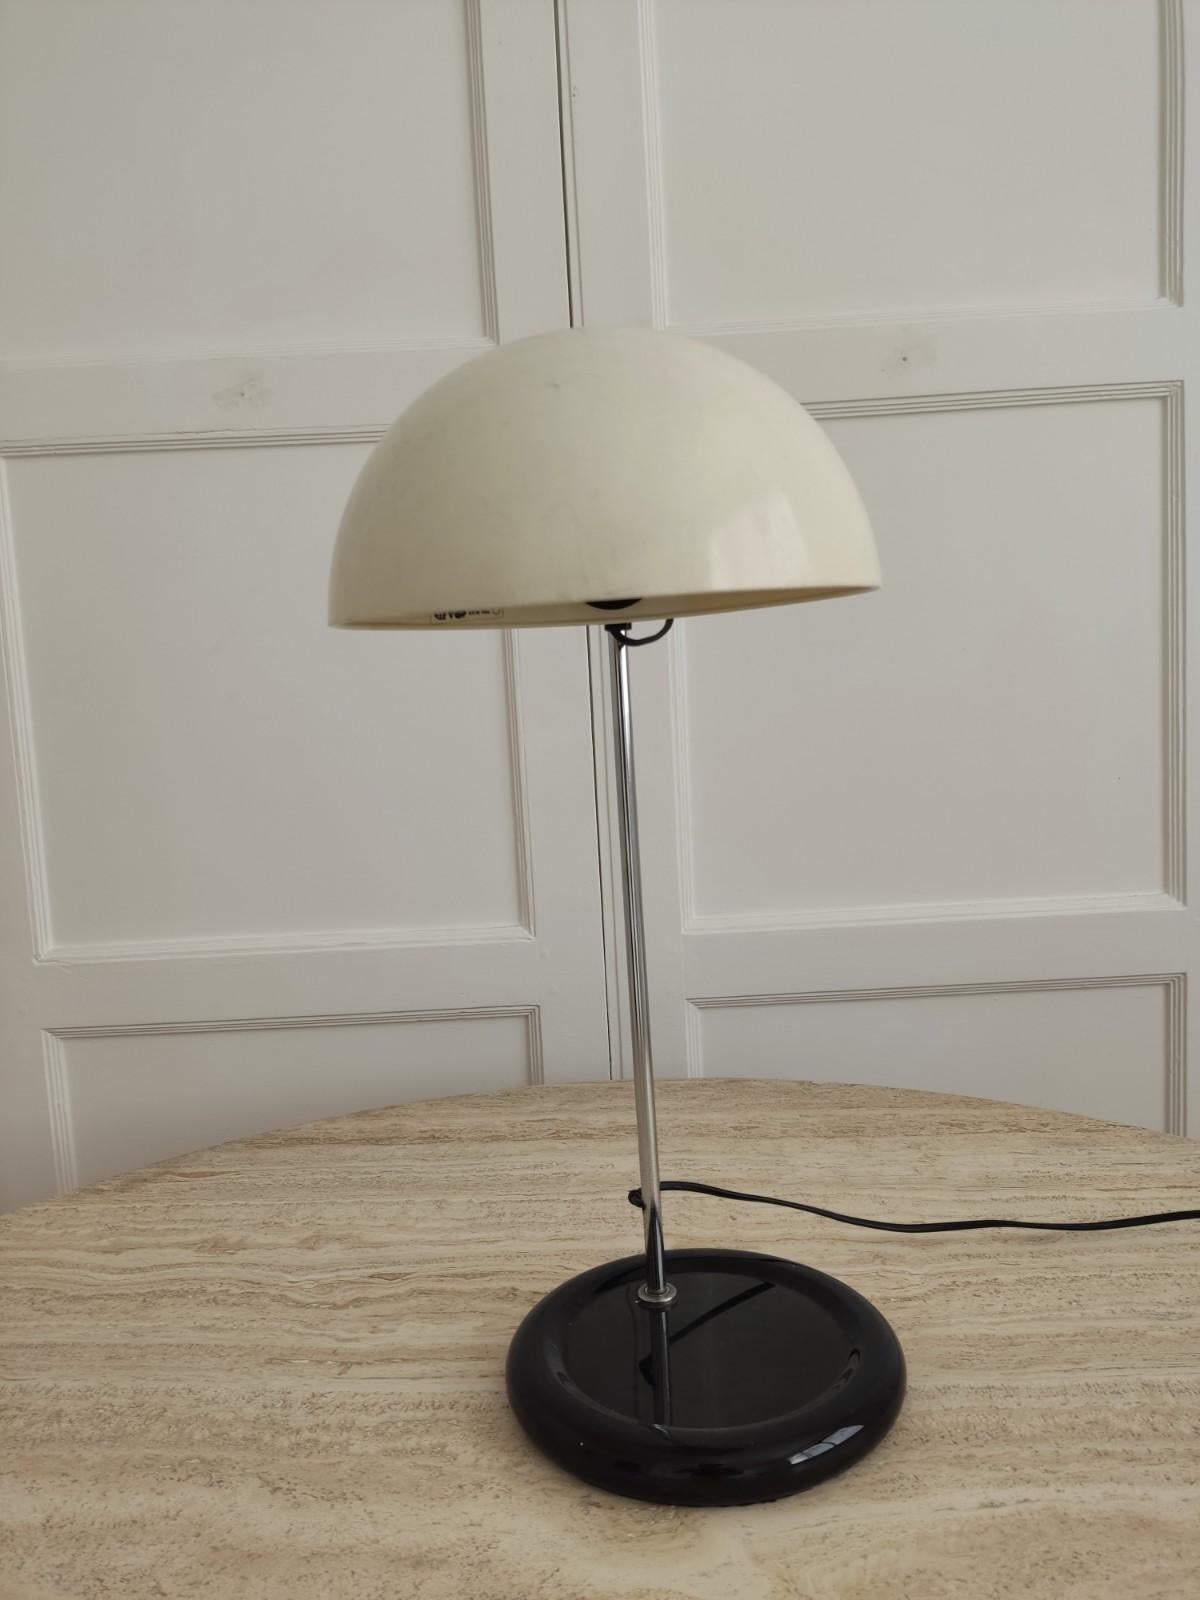 This luminaire consists of a height-adjustable reflector that swivels 360 degrees. The stem and the base are metallic. The light diffuser is made of plastic. The electrical wiring is integrated inside the metal rod which is fixed to the base of the